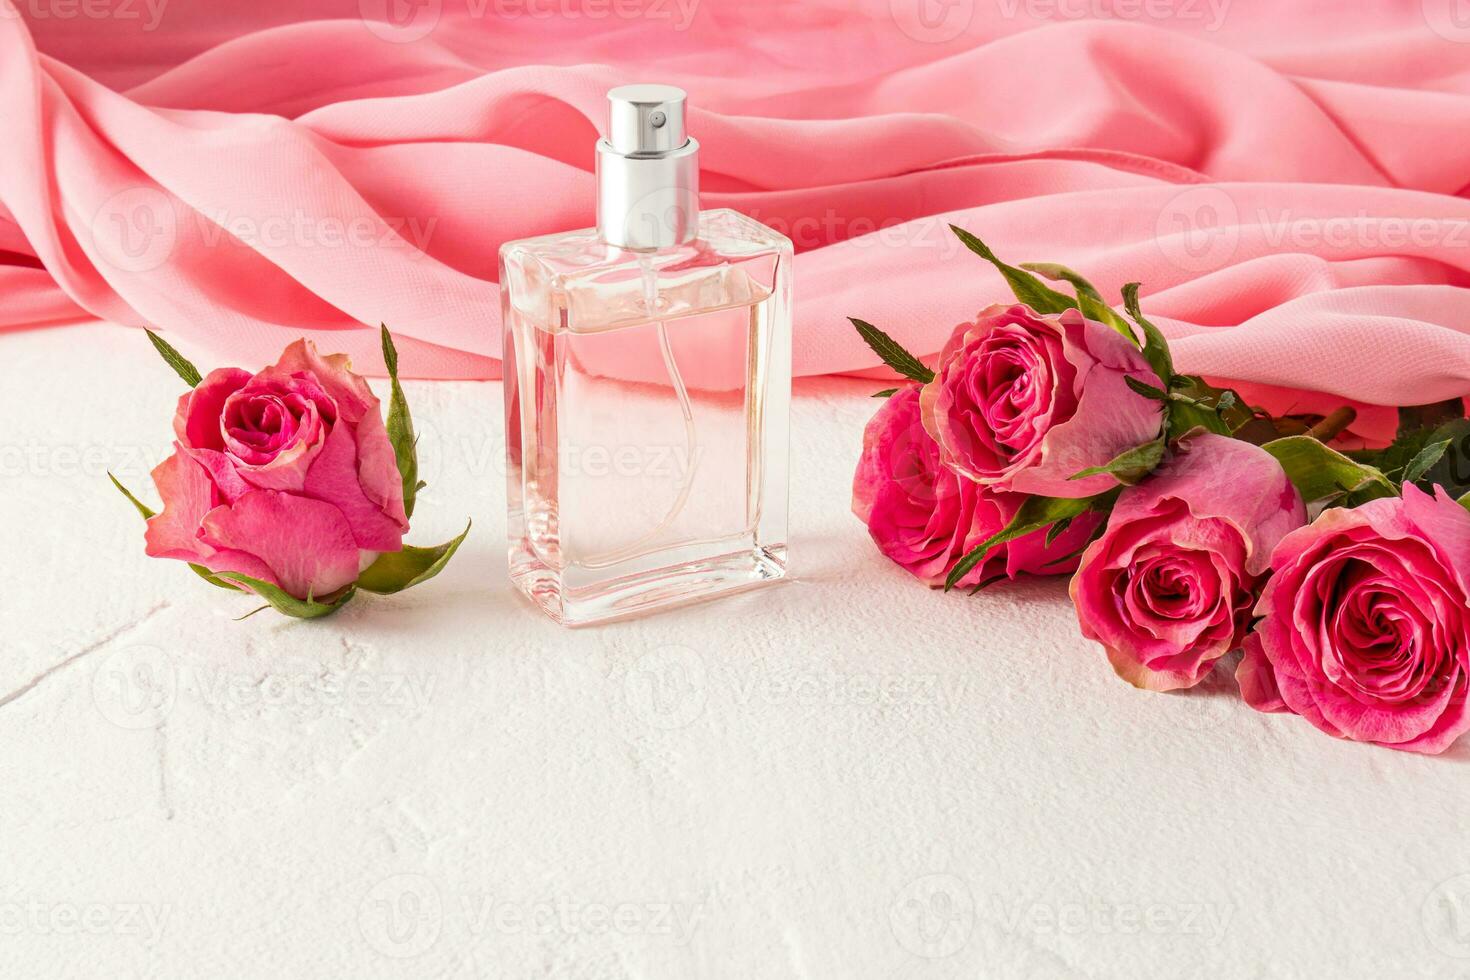 beautiful bottle of women's perfume or eau de parfum against a background of a pink chiffon scarf and fresh roses. Presentation of the fragrance. photo